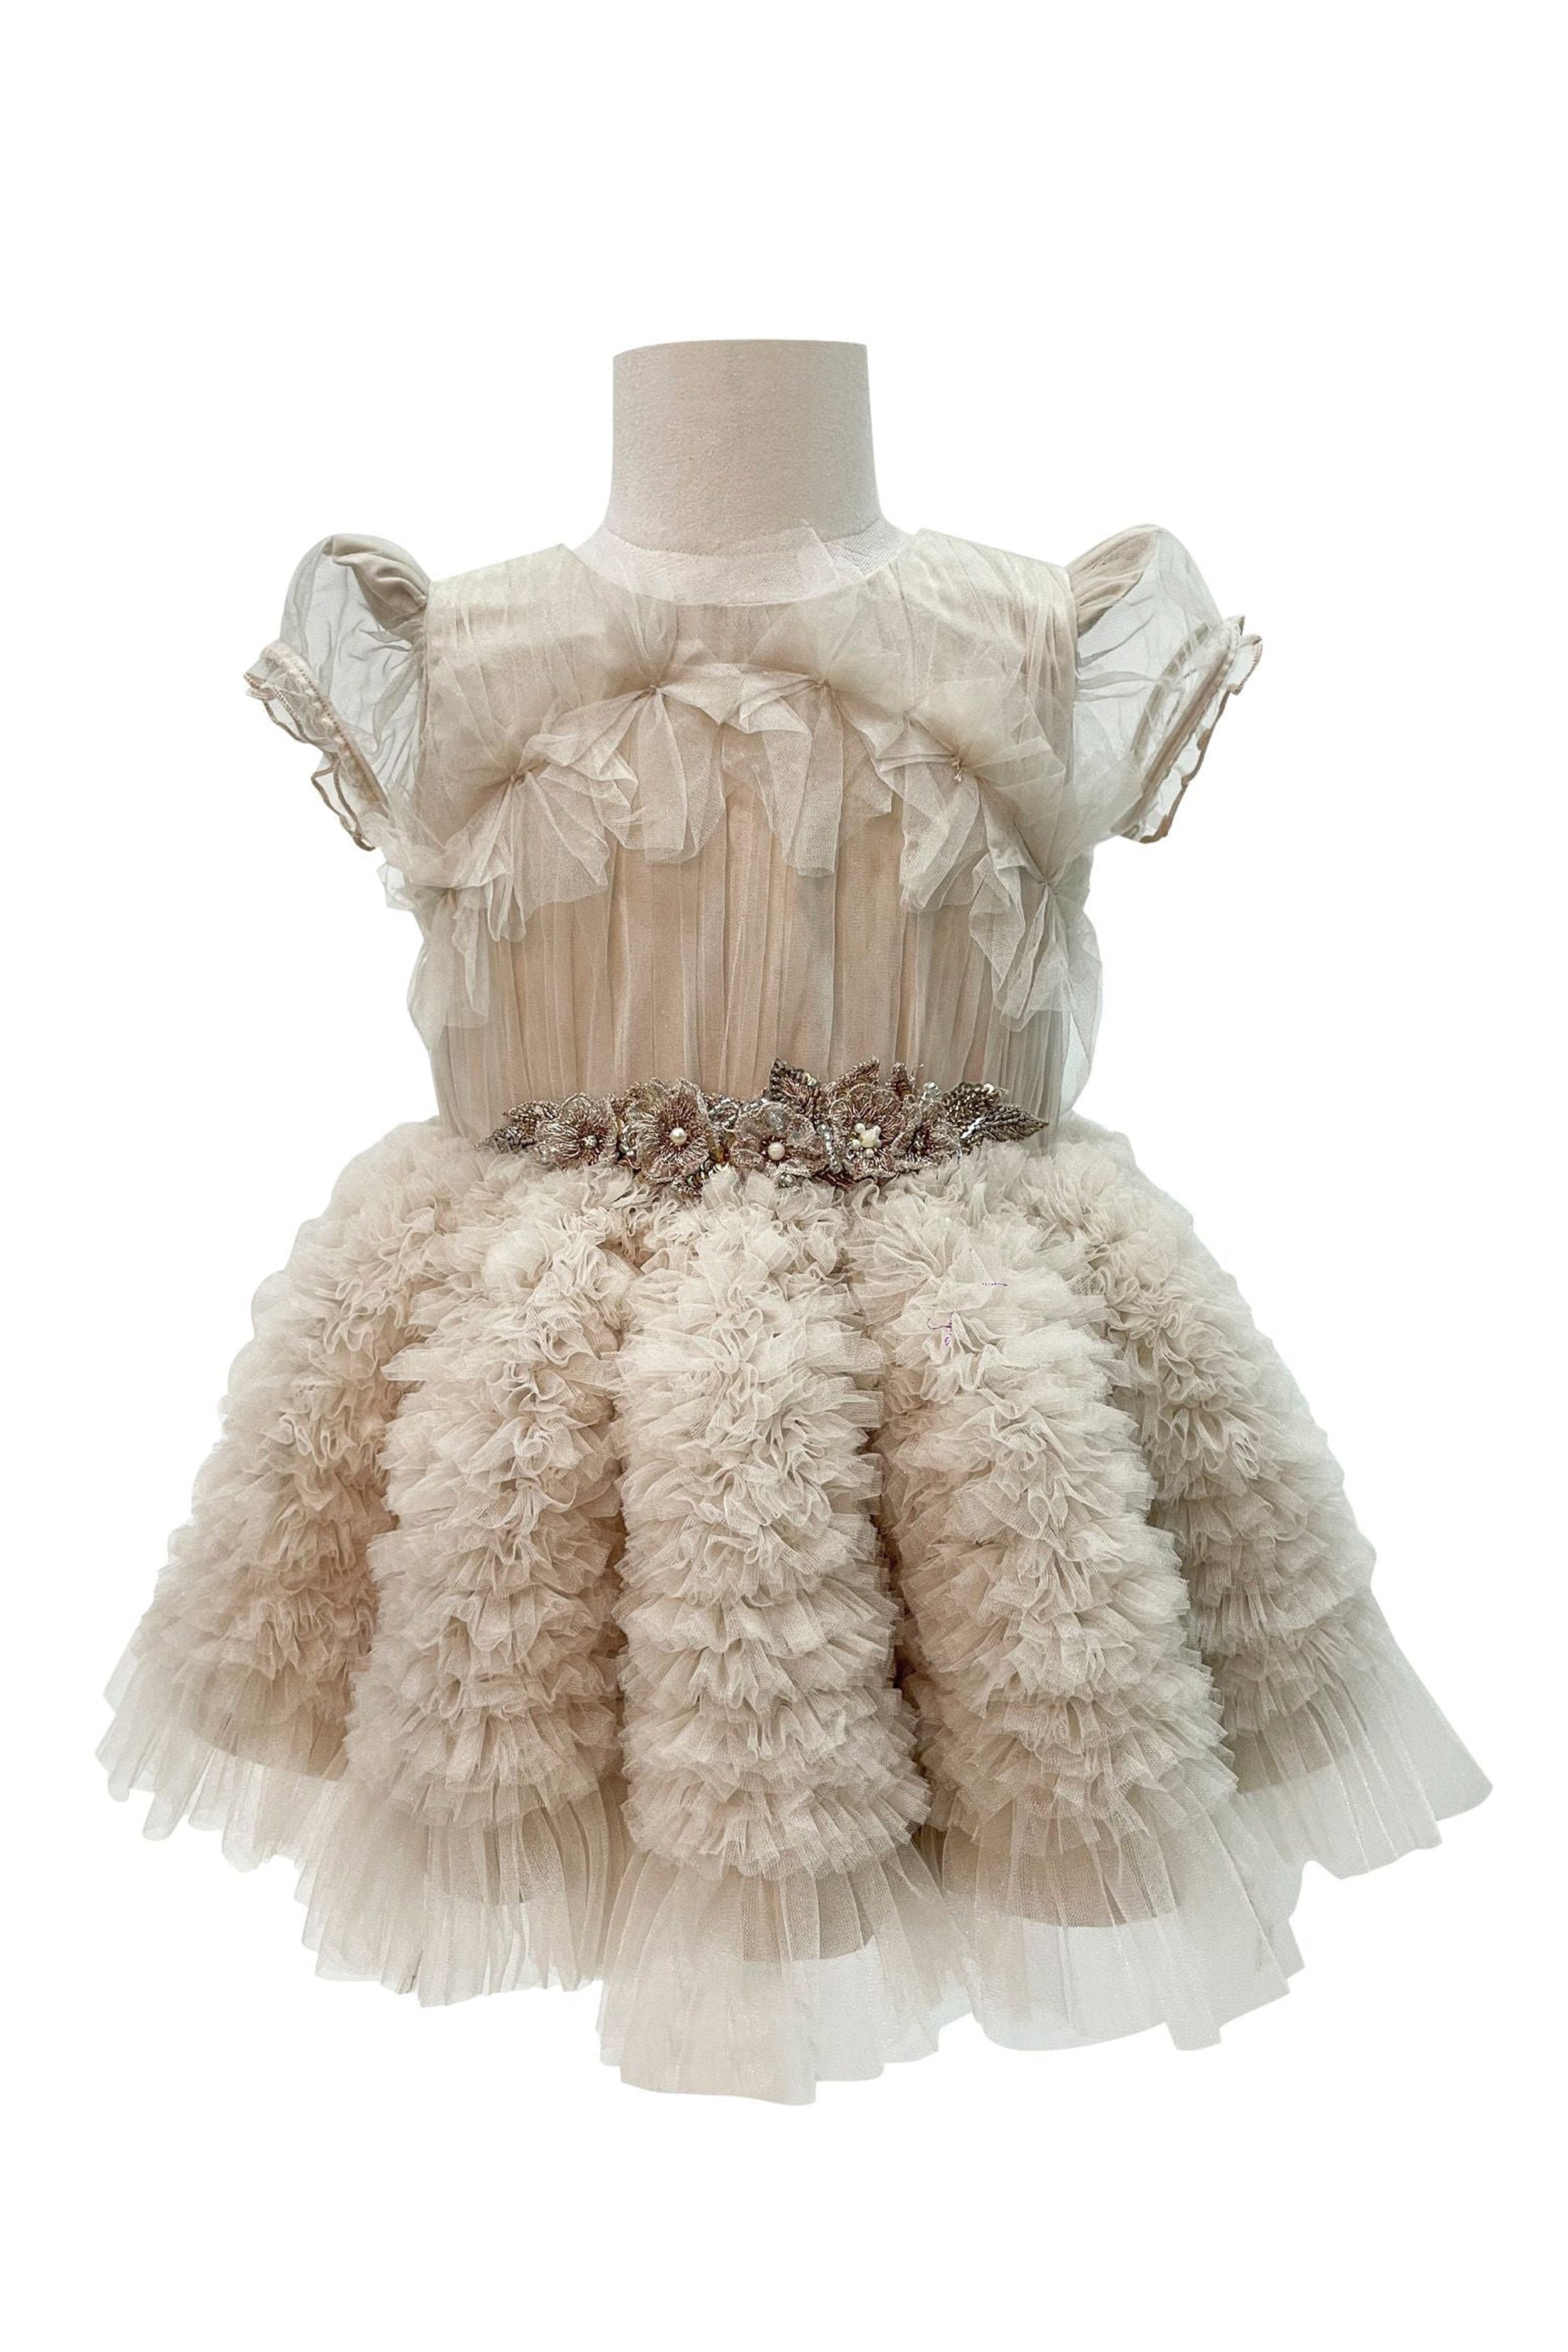 The Embellished Ariel Tulle Dress with Sleeves (Beige)